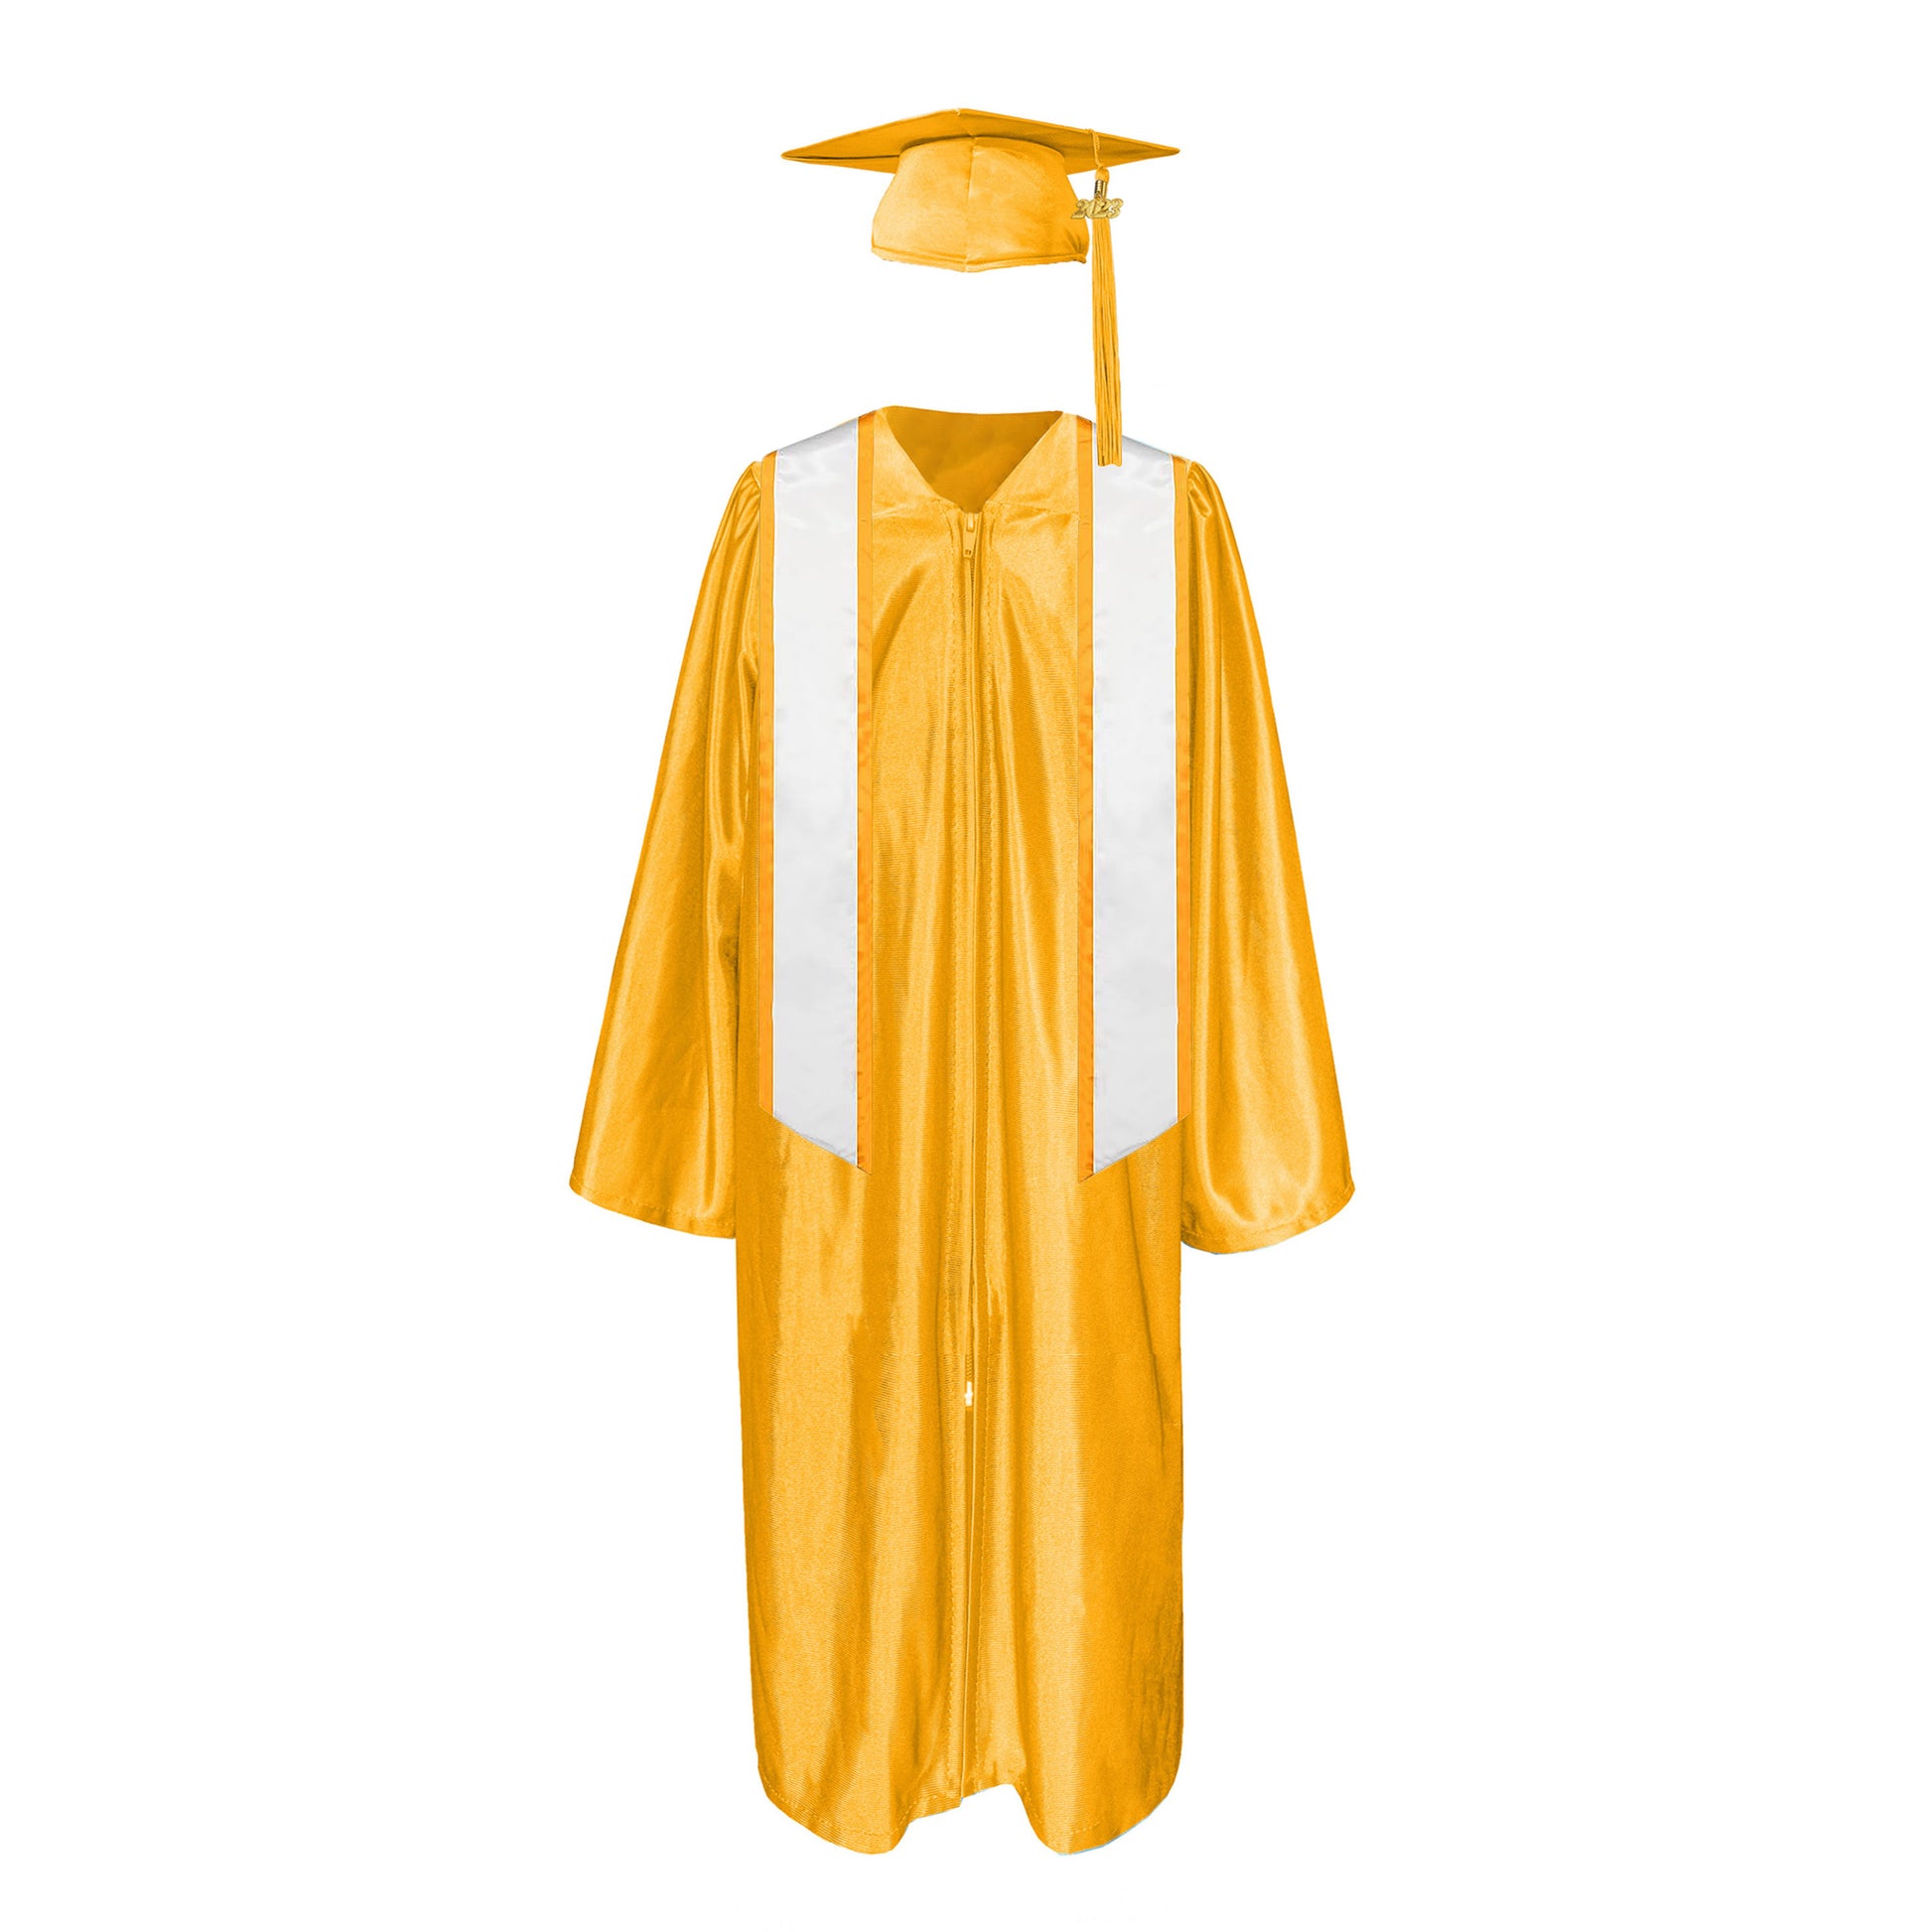 Shiny Cap With Tassel, Gown, Honor Stole Angled End with Trim 72”|graduate graduation gown-CA graduation